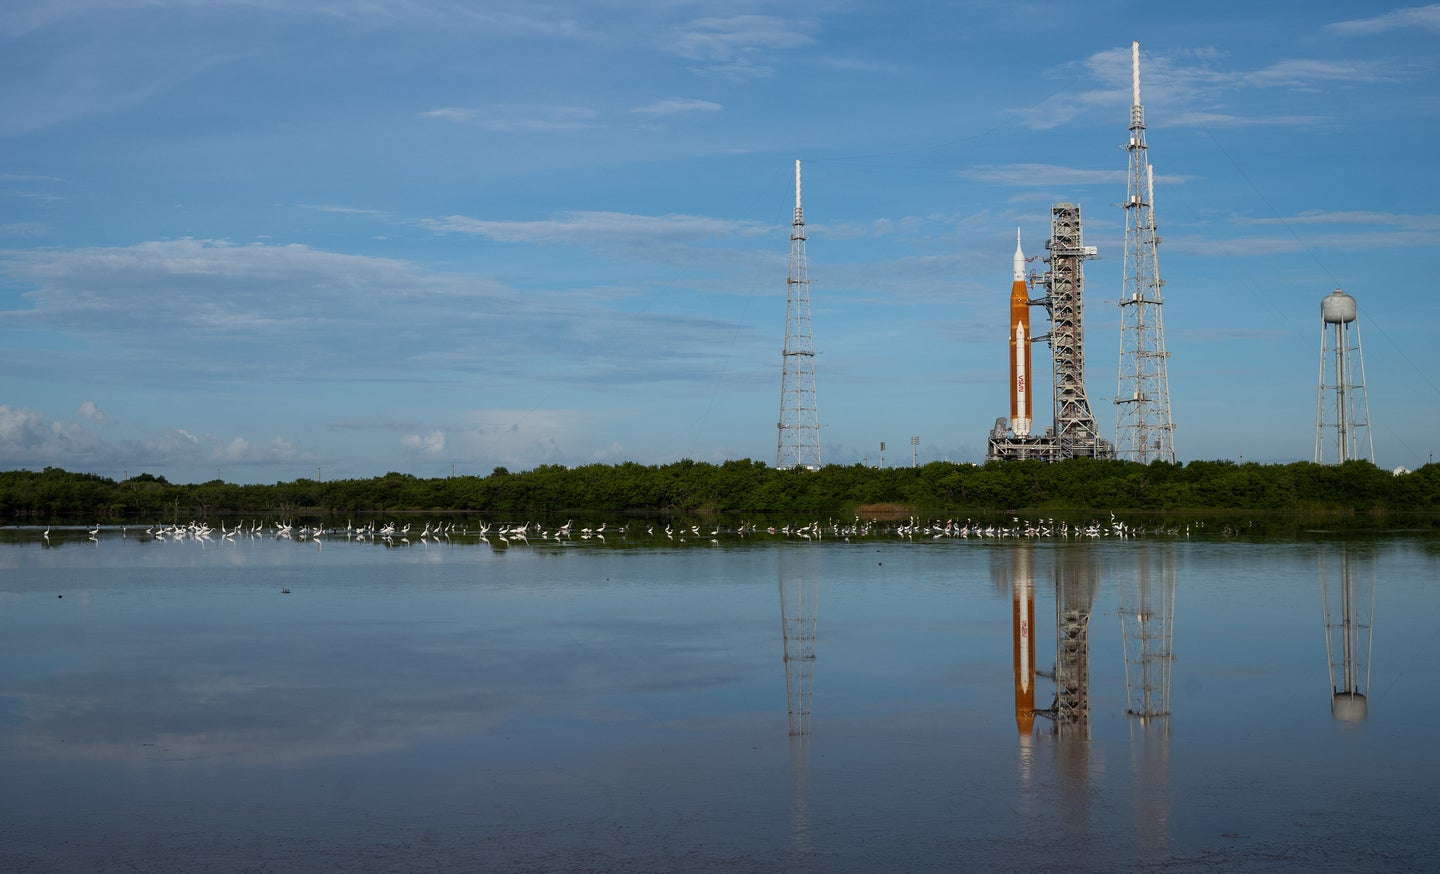 NASA’s Space Launch System rocket a mobile launcher on September 4 at the Kennedy Space Center in Florida.